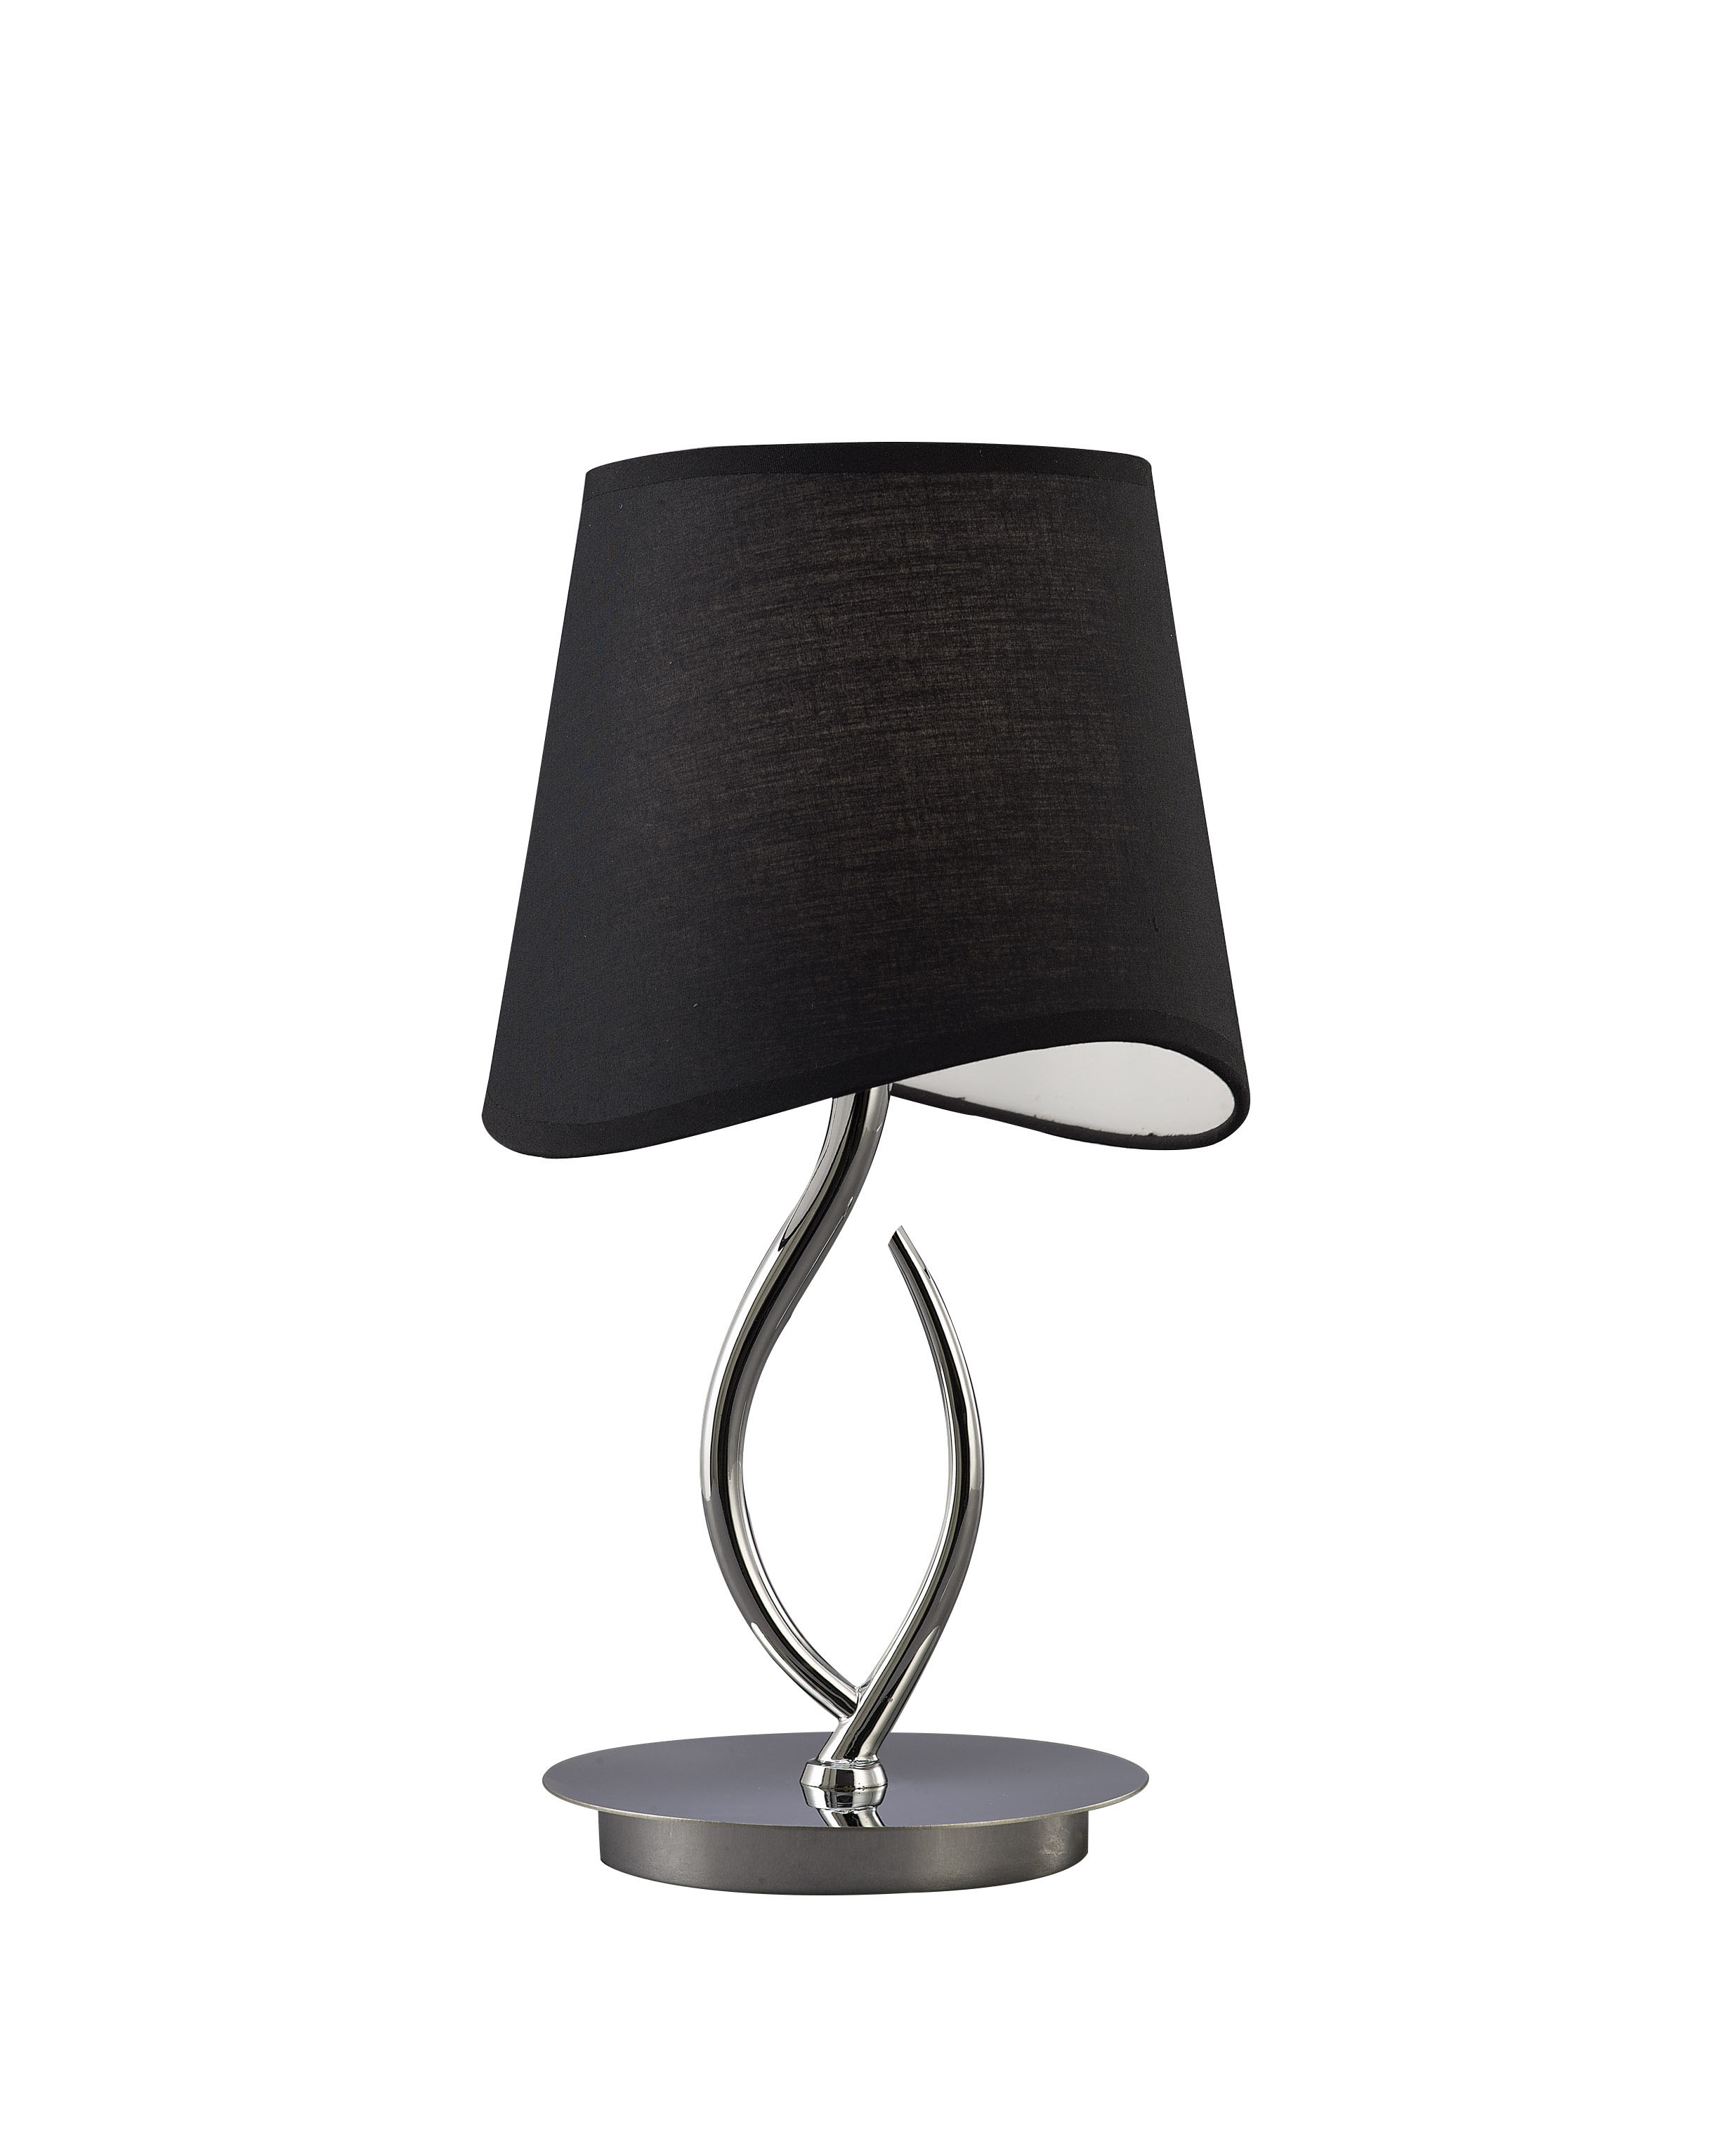 Mantra M1905 Bs Ninette Table Lamp 1, Small Black Table Lamp With White Shade